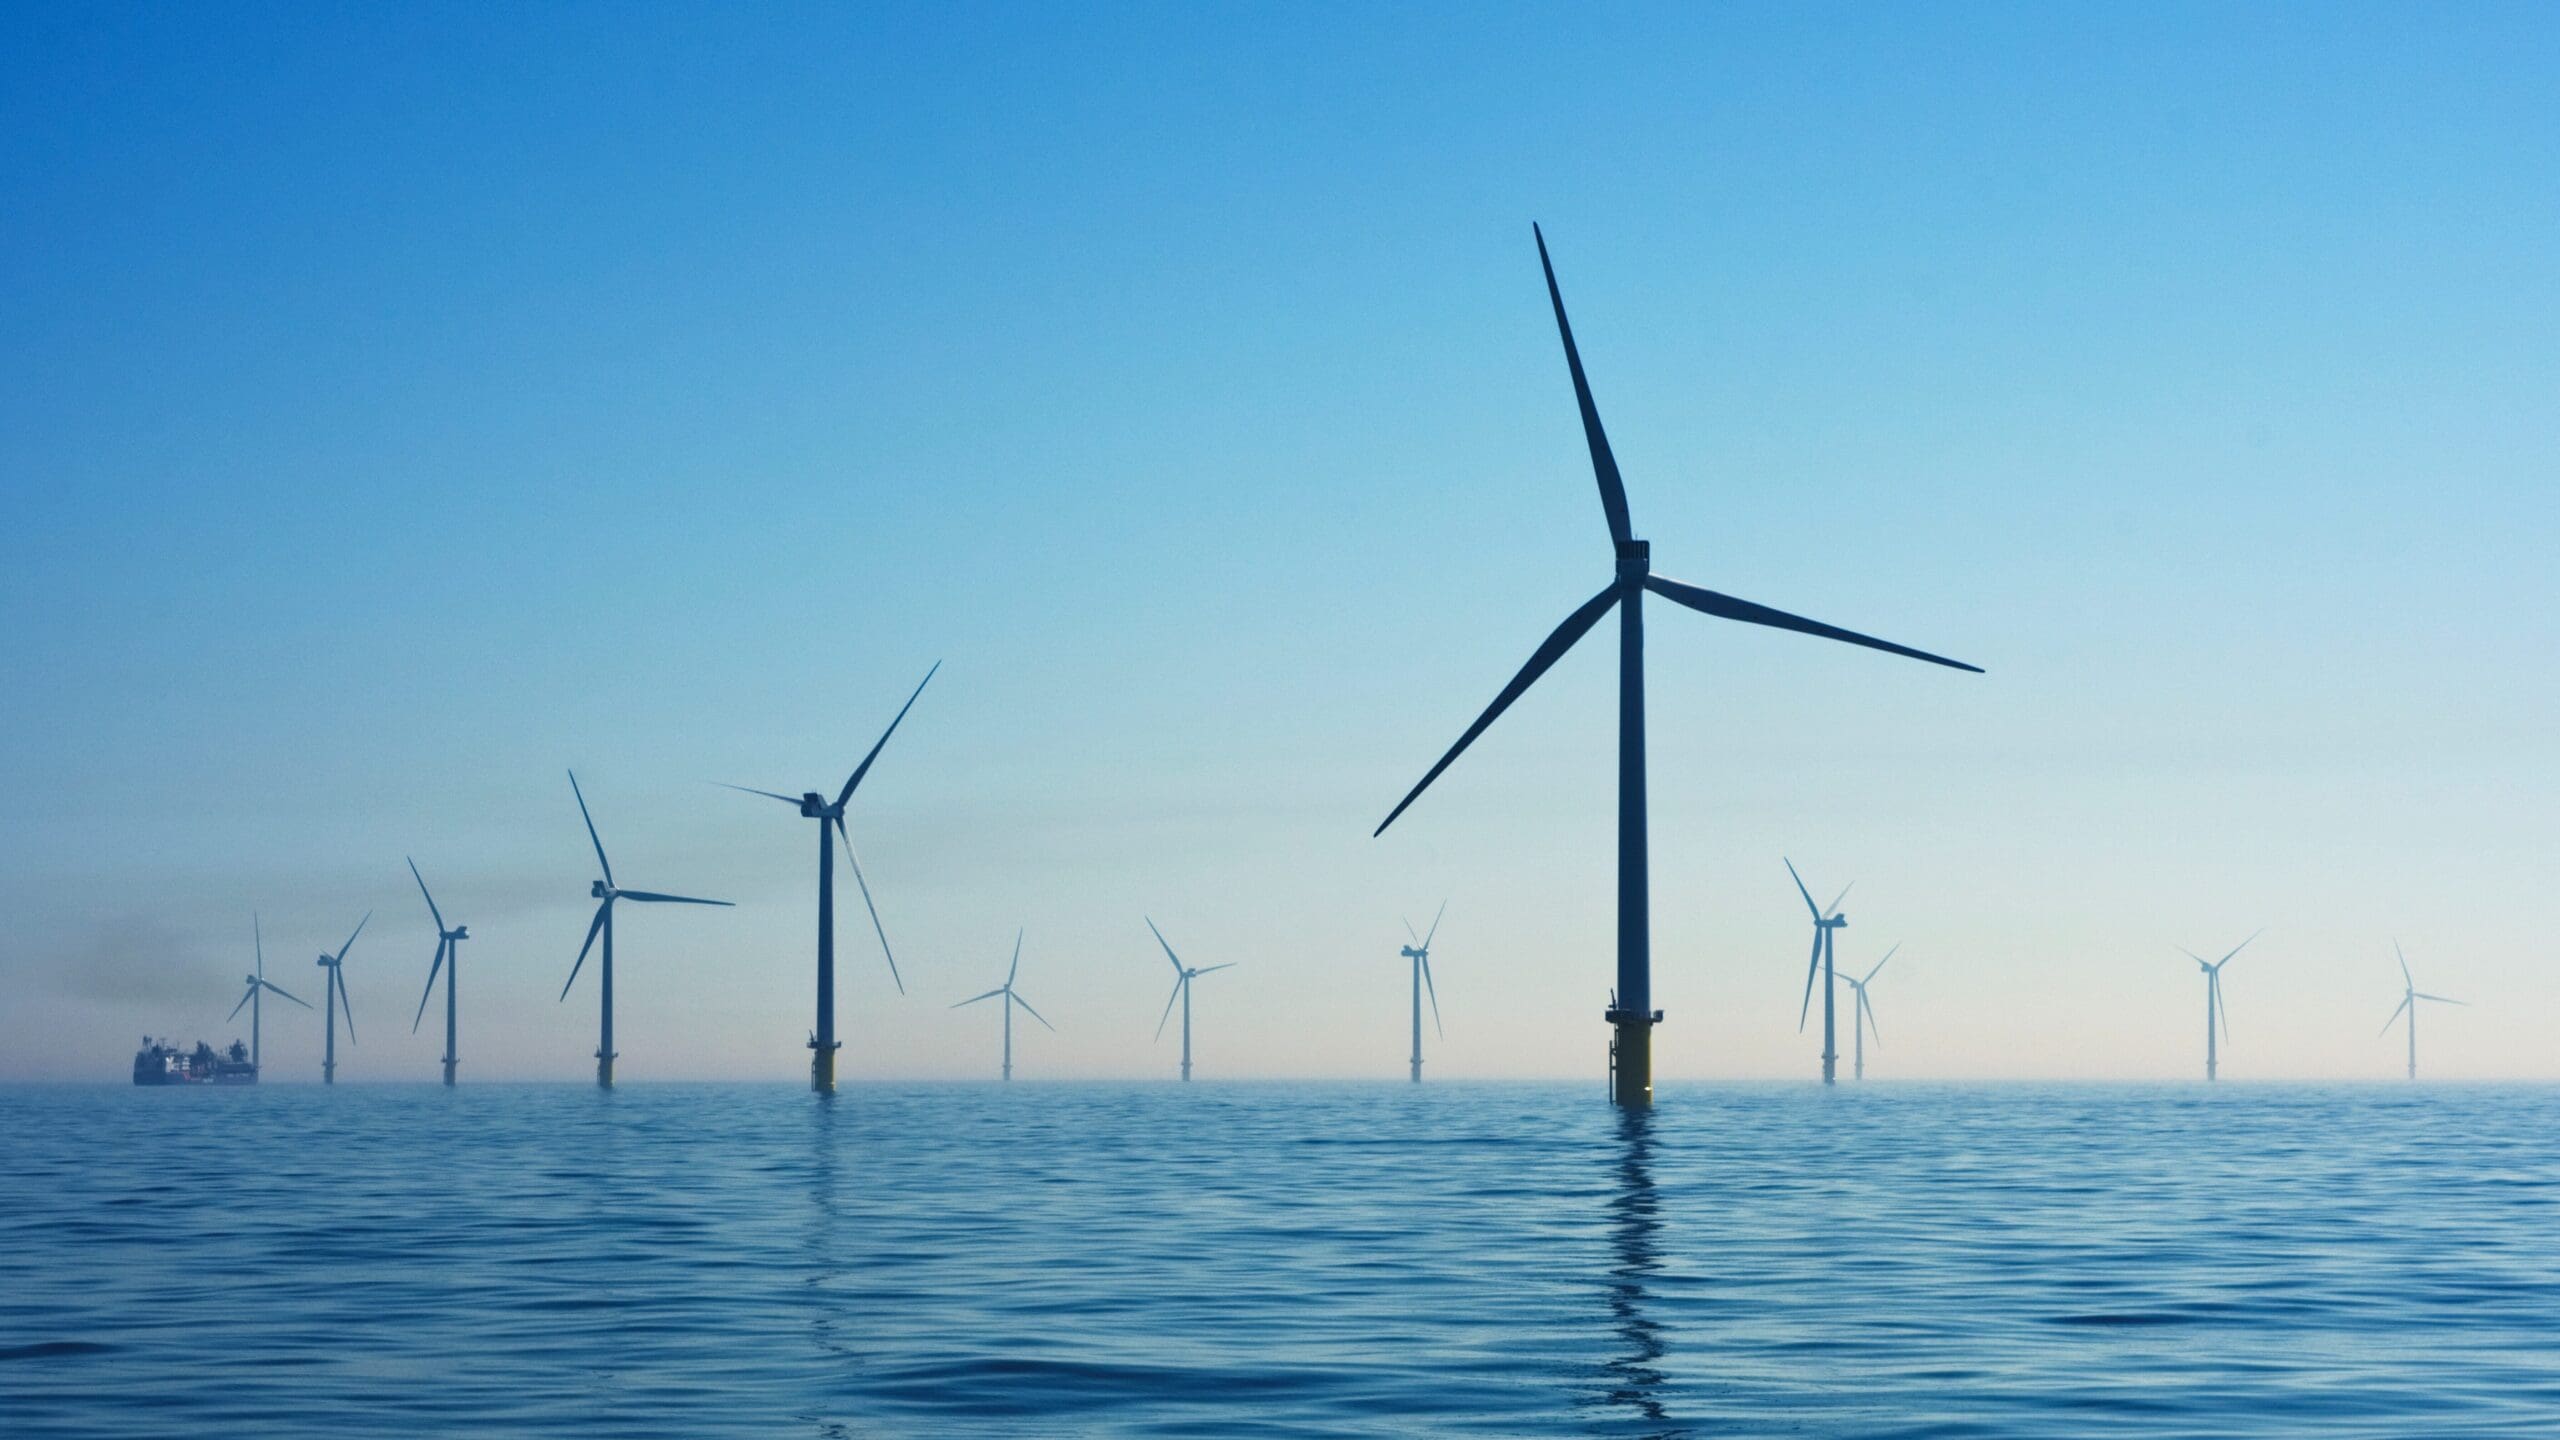 A group of wind turbines in water